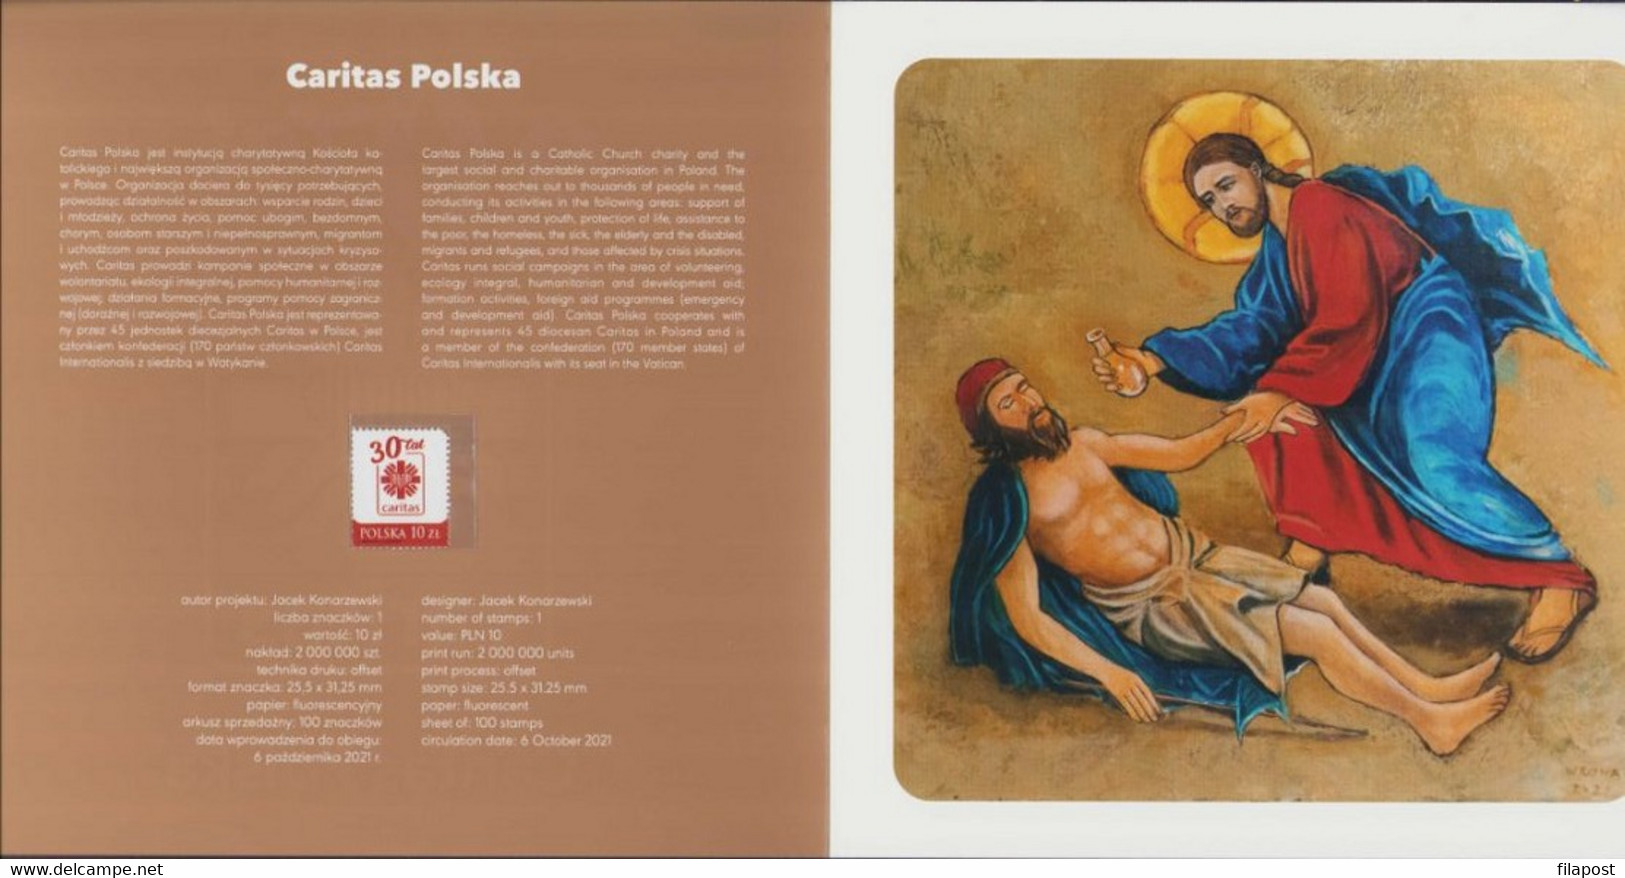 Poland 2021 Booklet / Caritas Polska, Organisation, Charity Institution, Church, Catholic Relief / With Stamp MNH** New! - Carnets